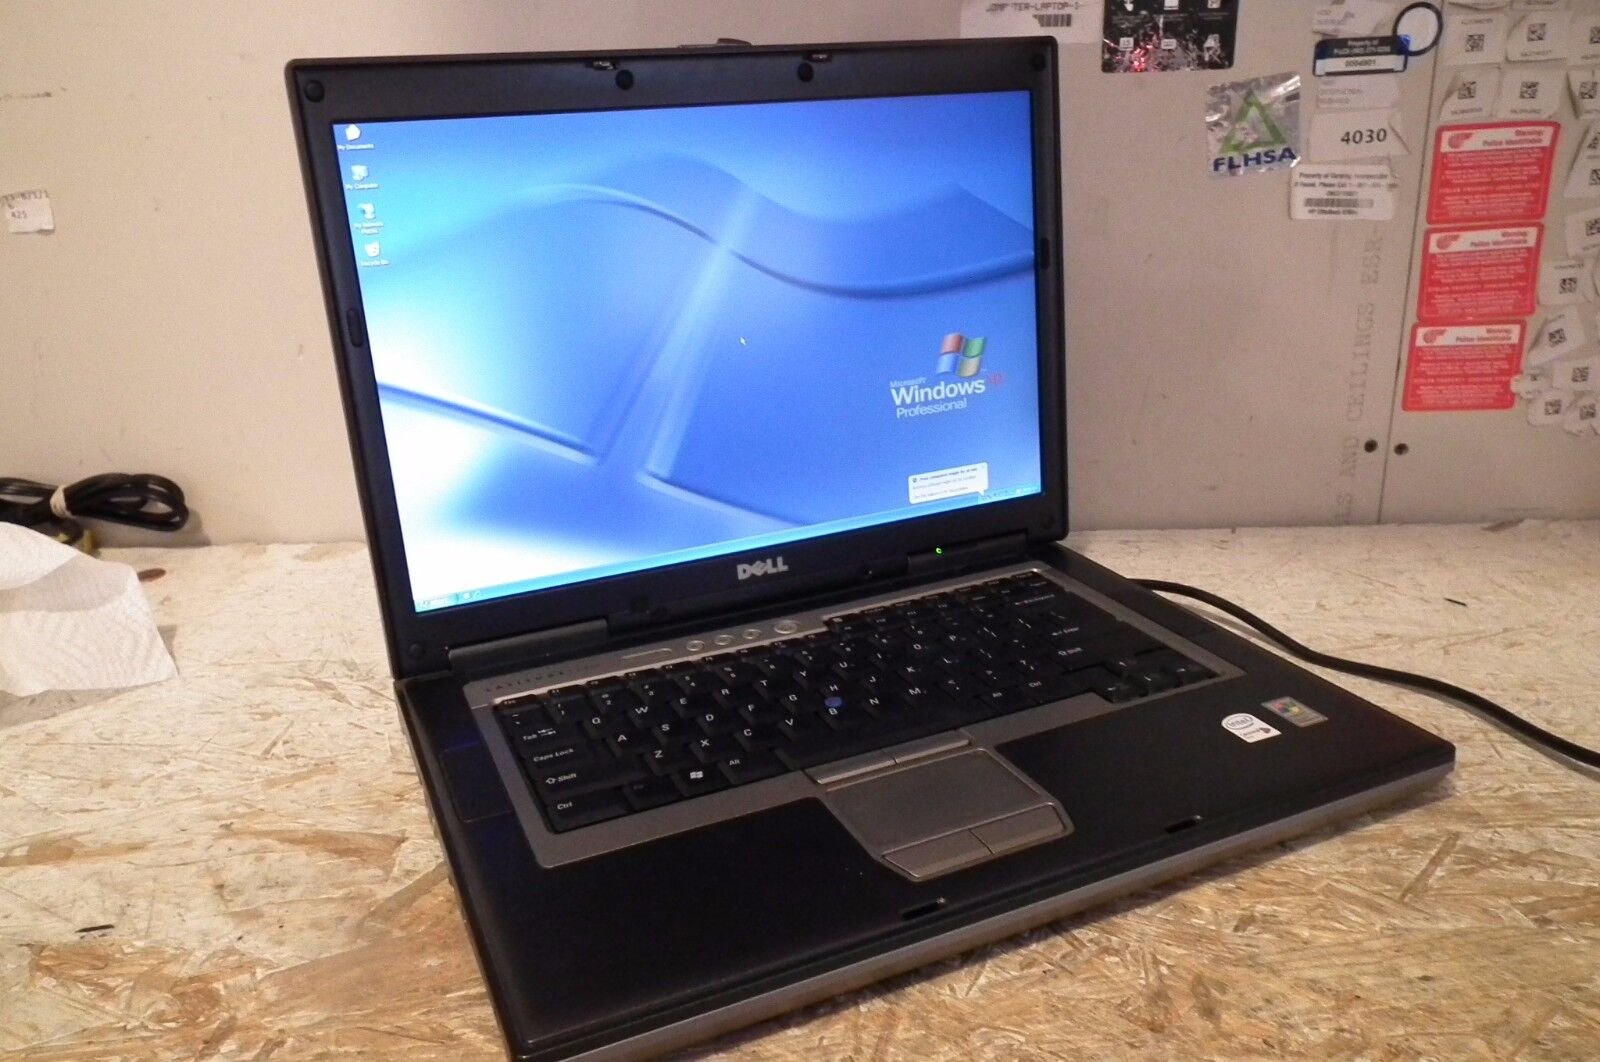 Dell D620 Laptop Intel Core 2 Duo 2GB RAM 80GB HDD WinXP RS232 - C-GRADE